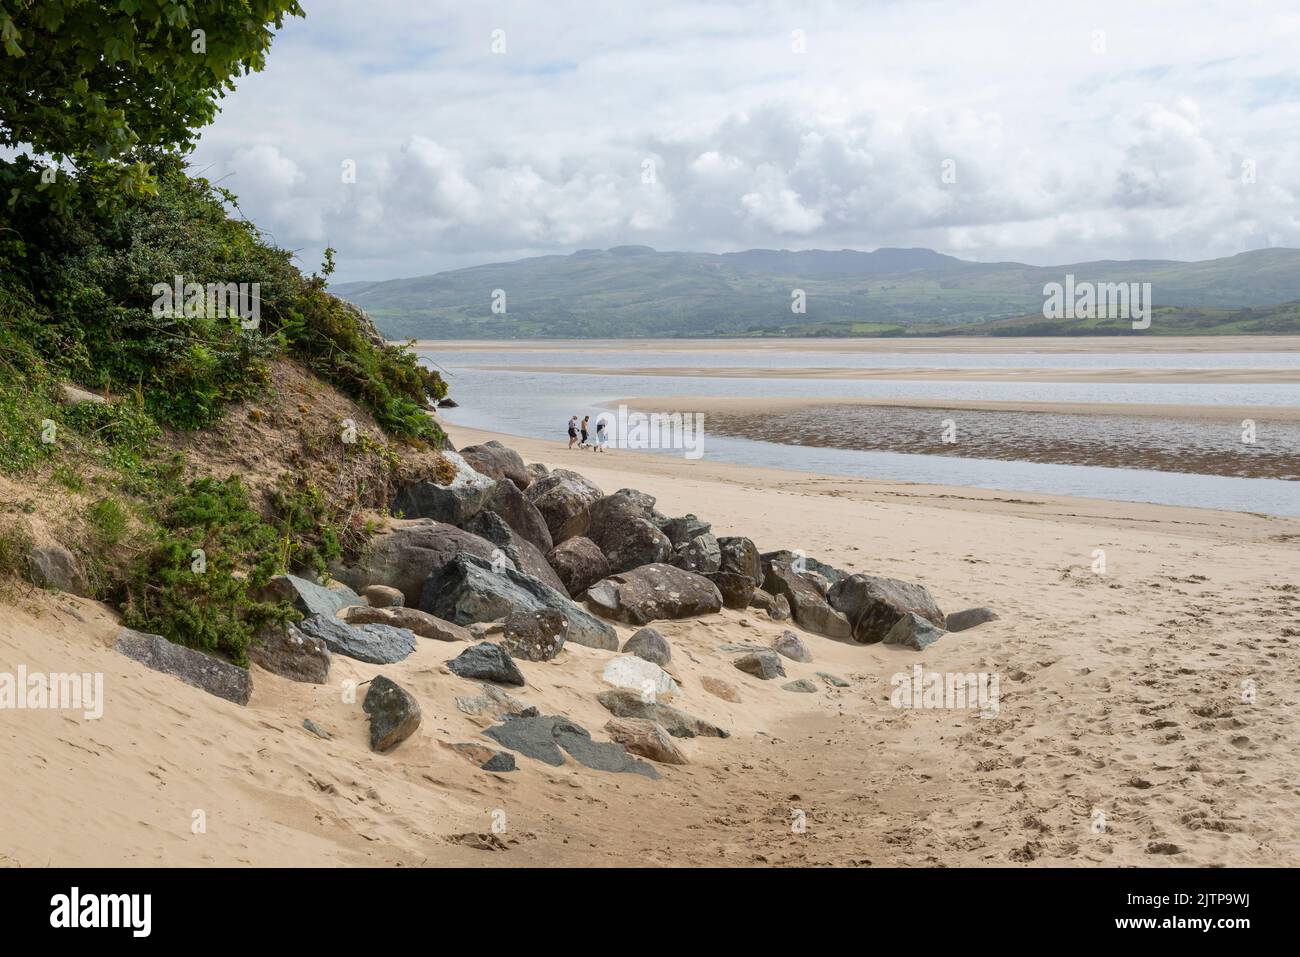 Walkers on the beach at Borth-y-Gest overlooking the Glaslyn estuary in North Wales. Stock Photo